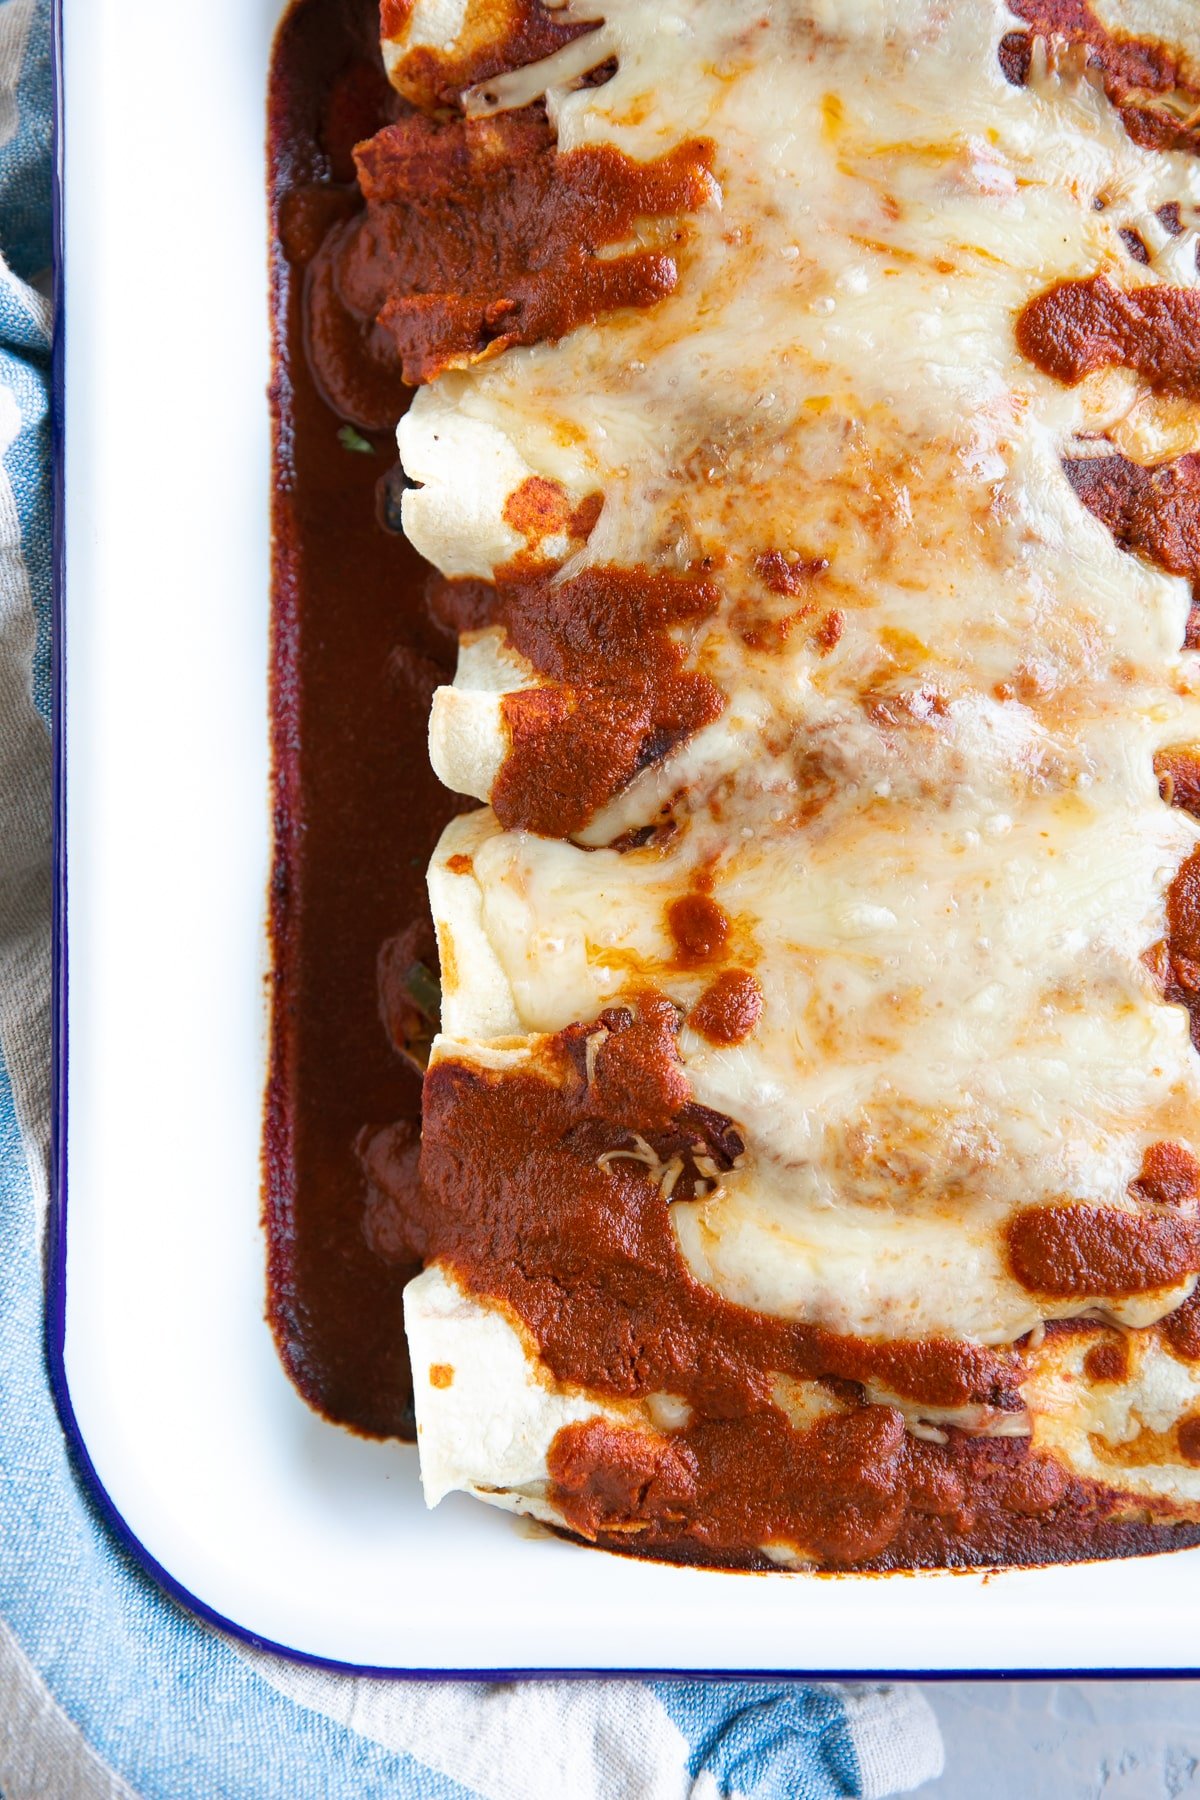 White baking dish filled with vegetarian enchiladas topped with enchilada sauce and melted cheese.